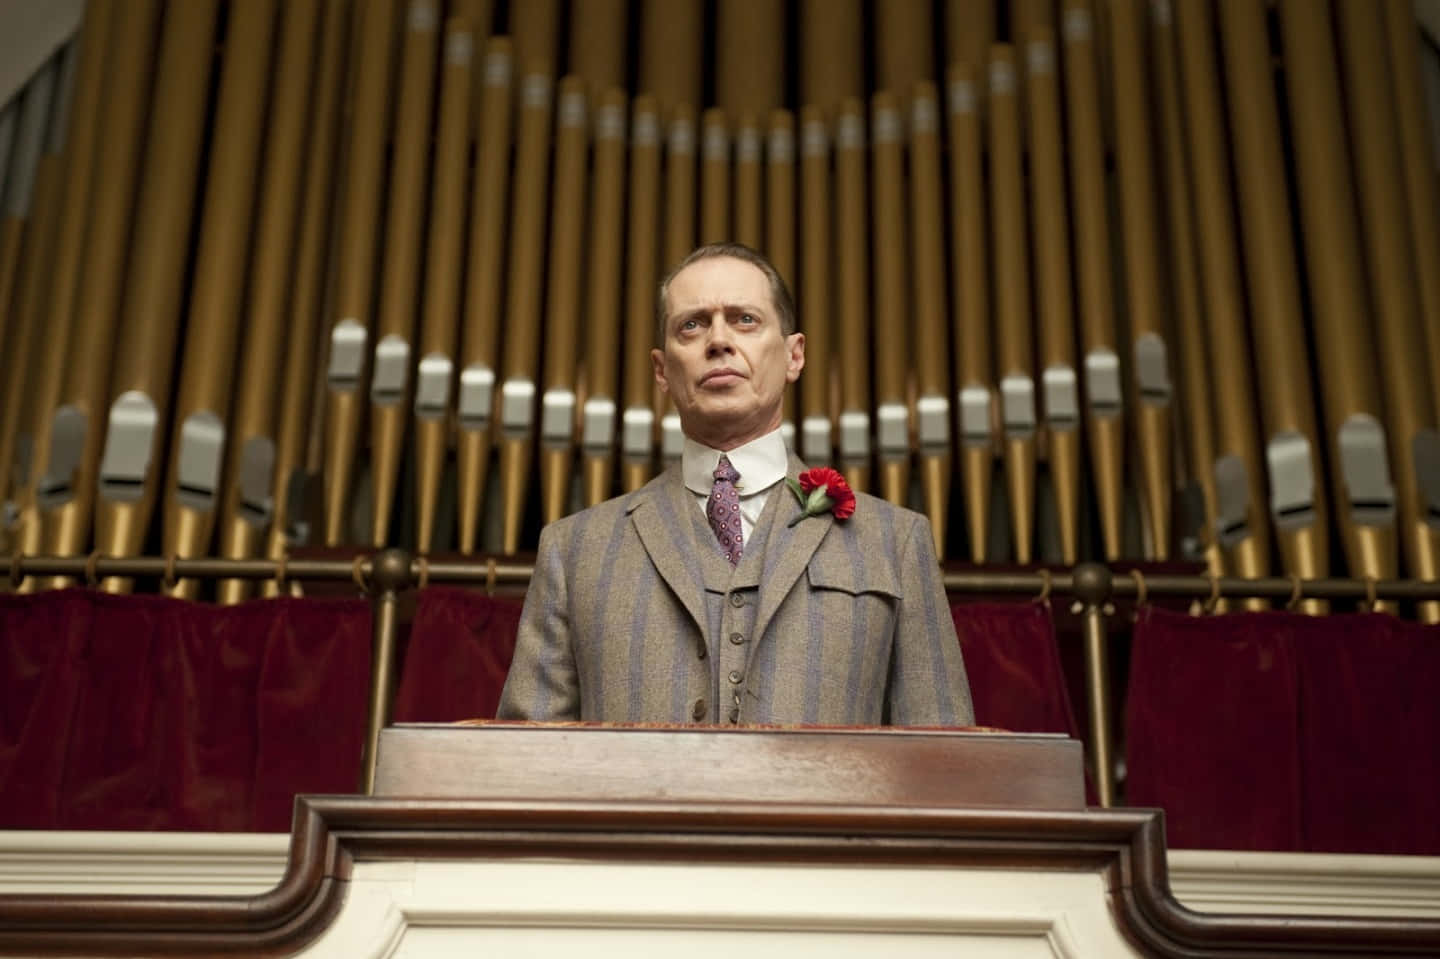 Steve Buscemi In Character, Portraying The Role Of Such An Amazing Actor